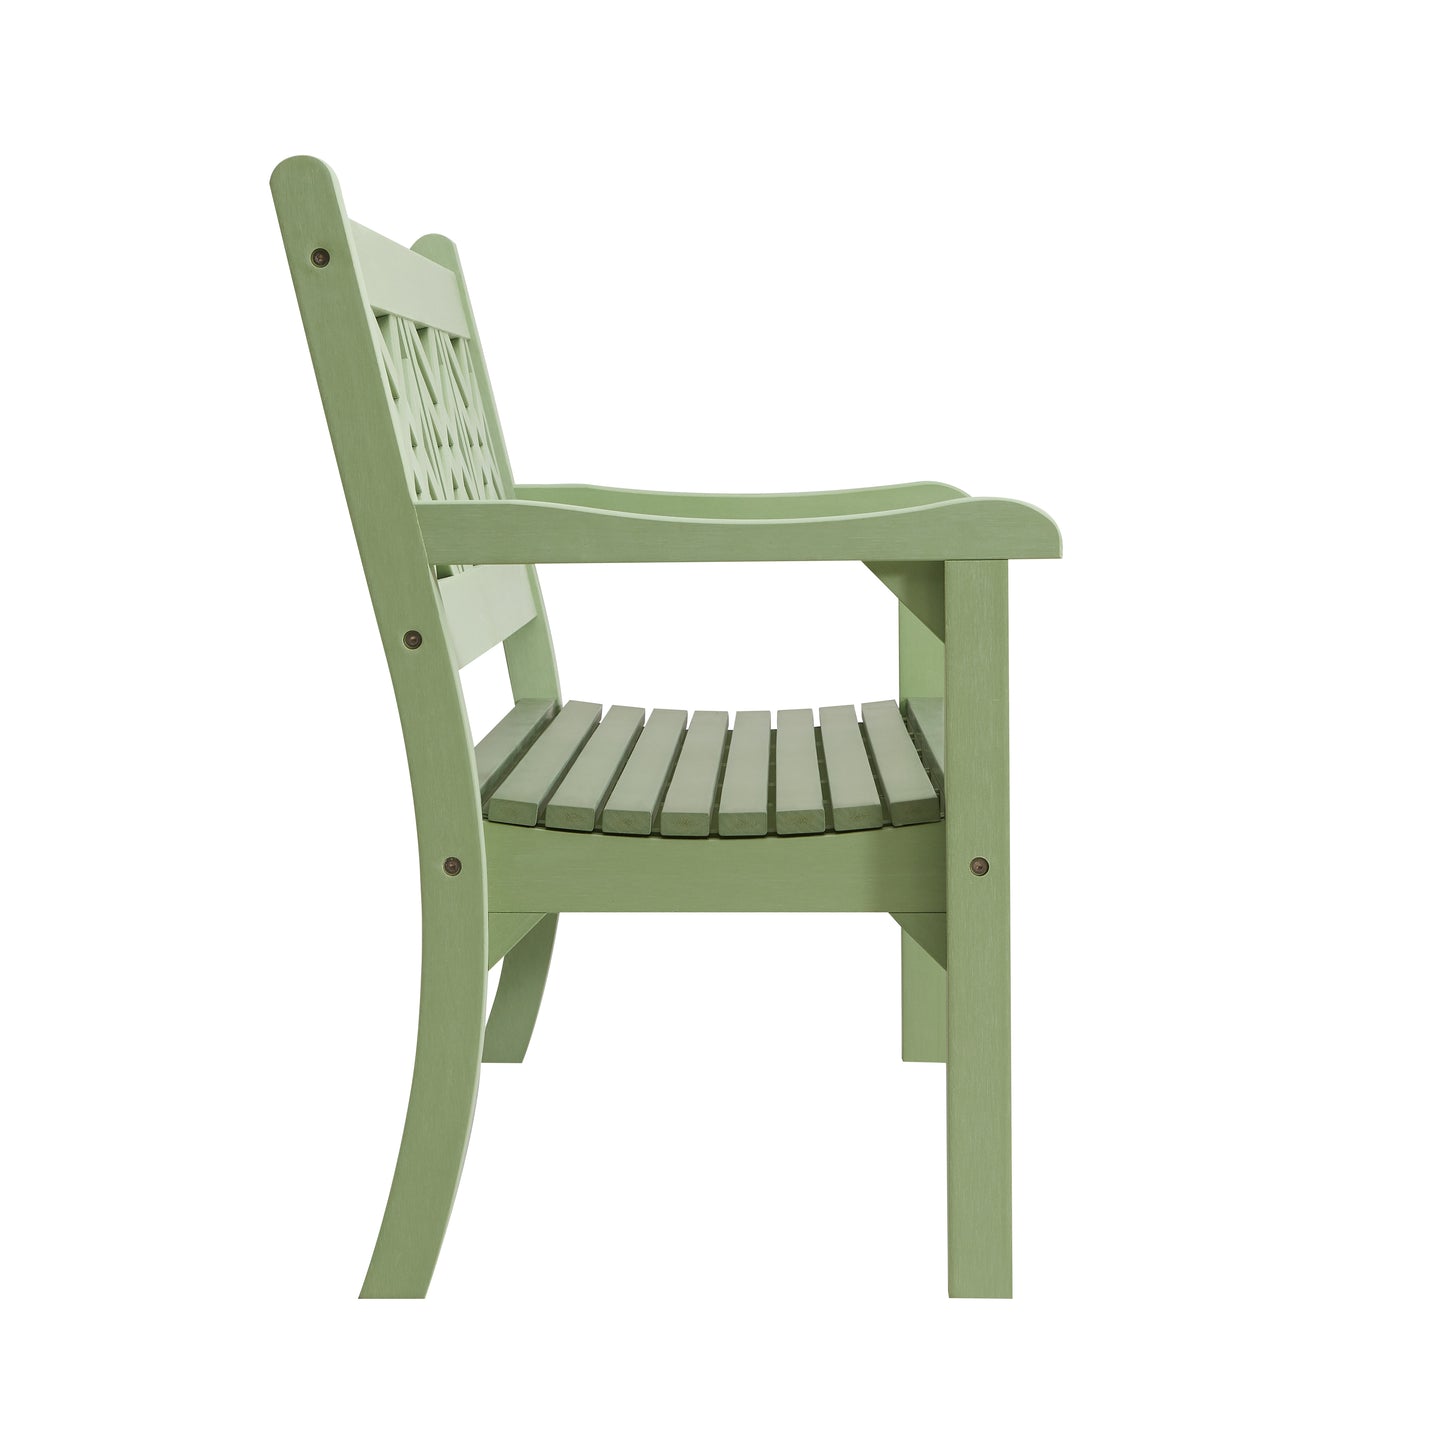 Winawood Speyside 3 Seater Wood Effect Bench - Duck Egg Green